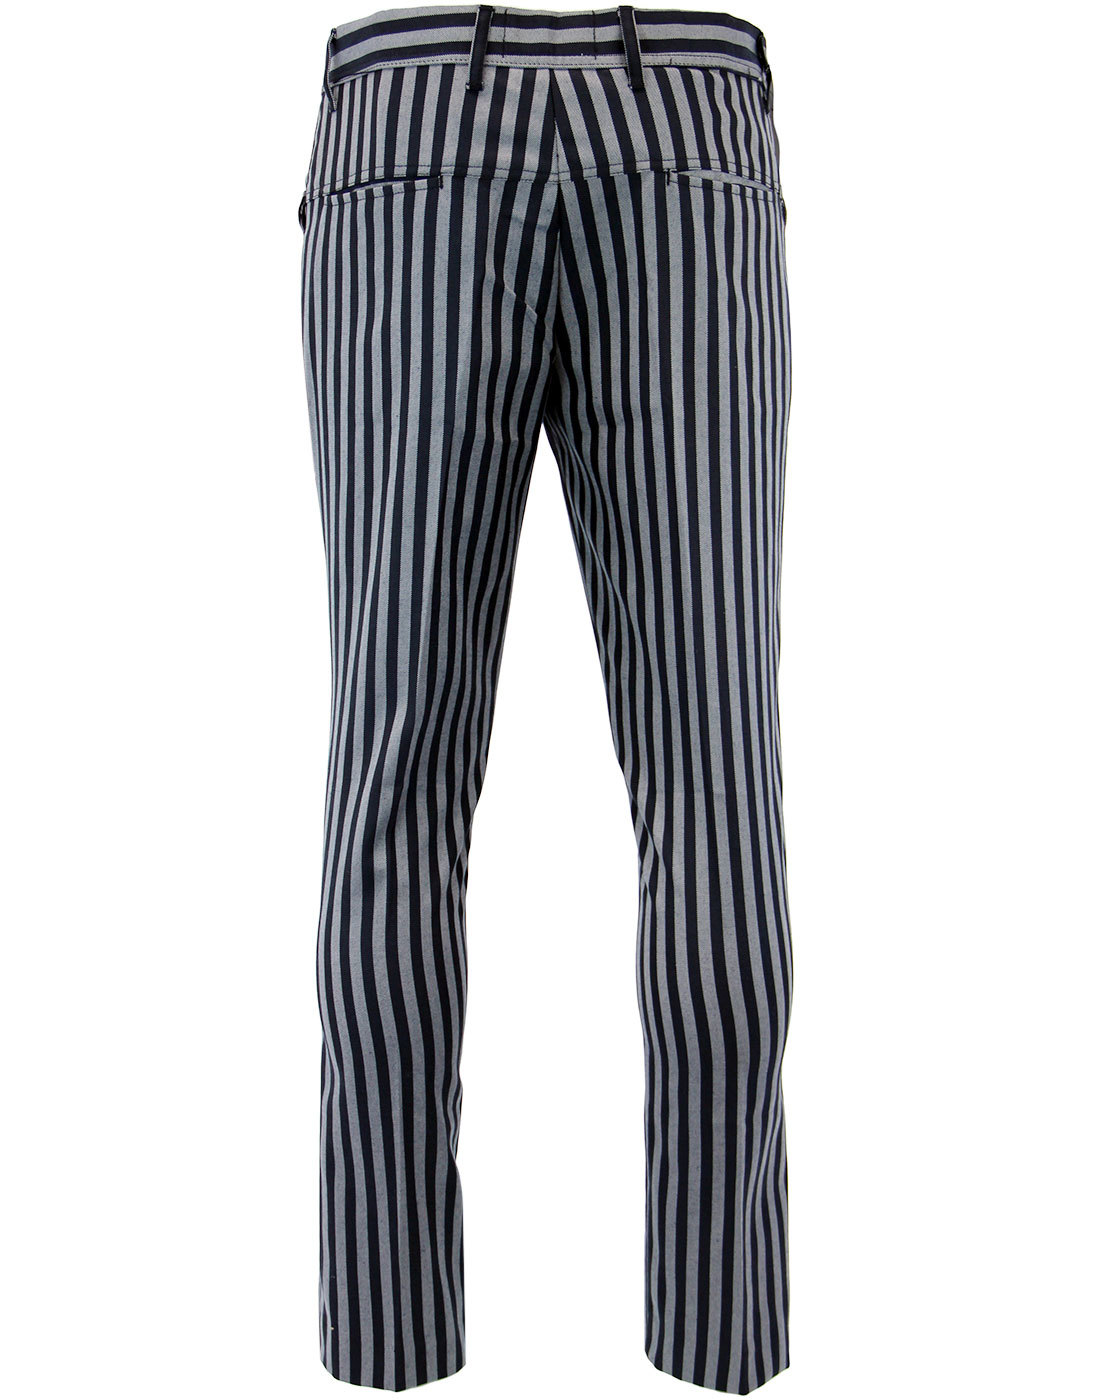 MADCAP ENGLAND Meadon 60s Mod Boating Stripe Frogmouth Trousers